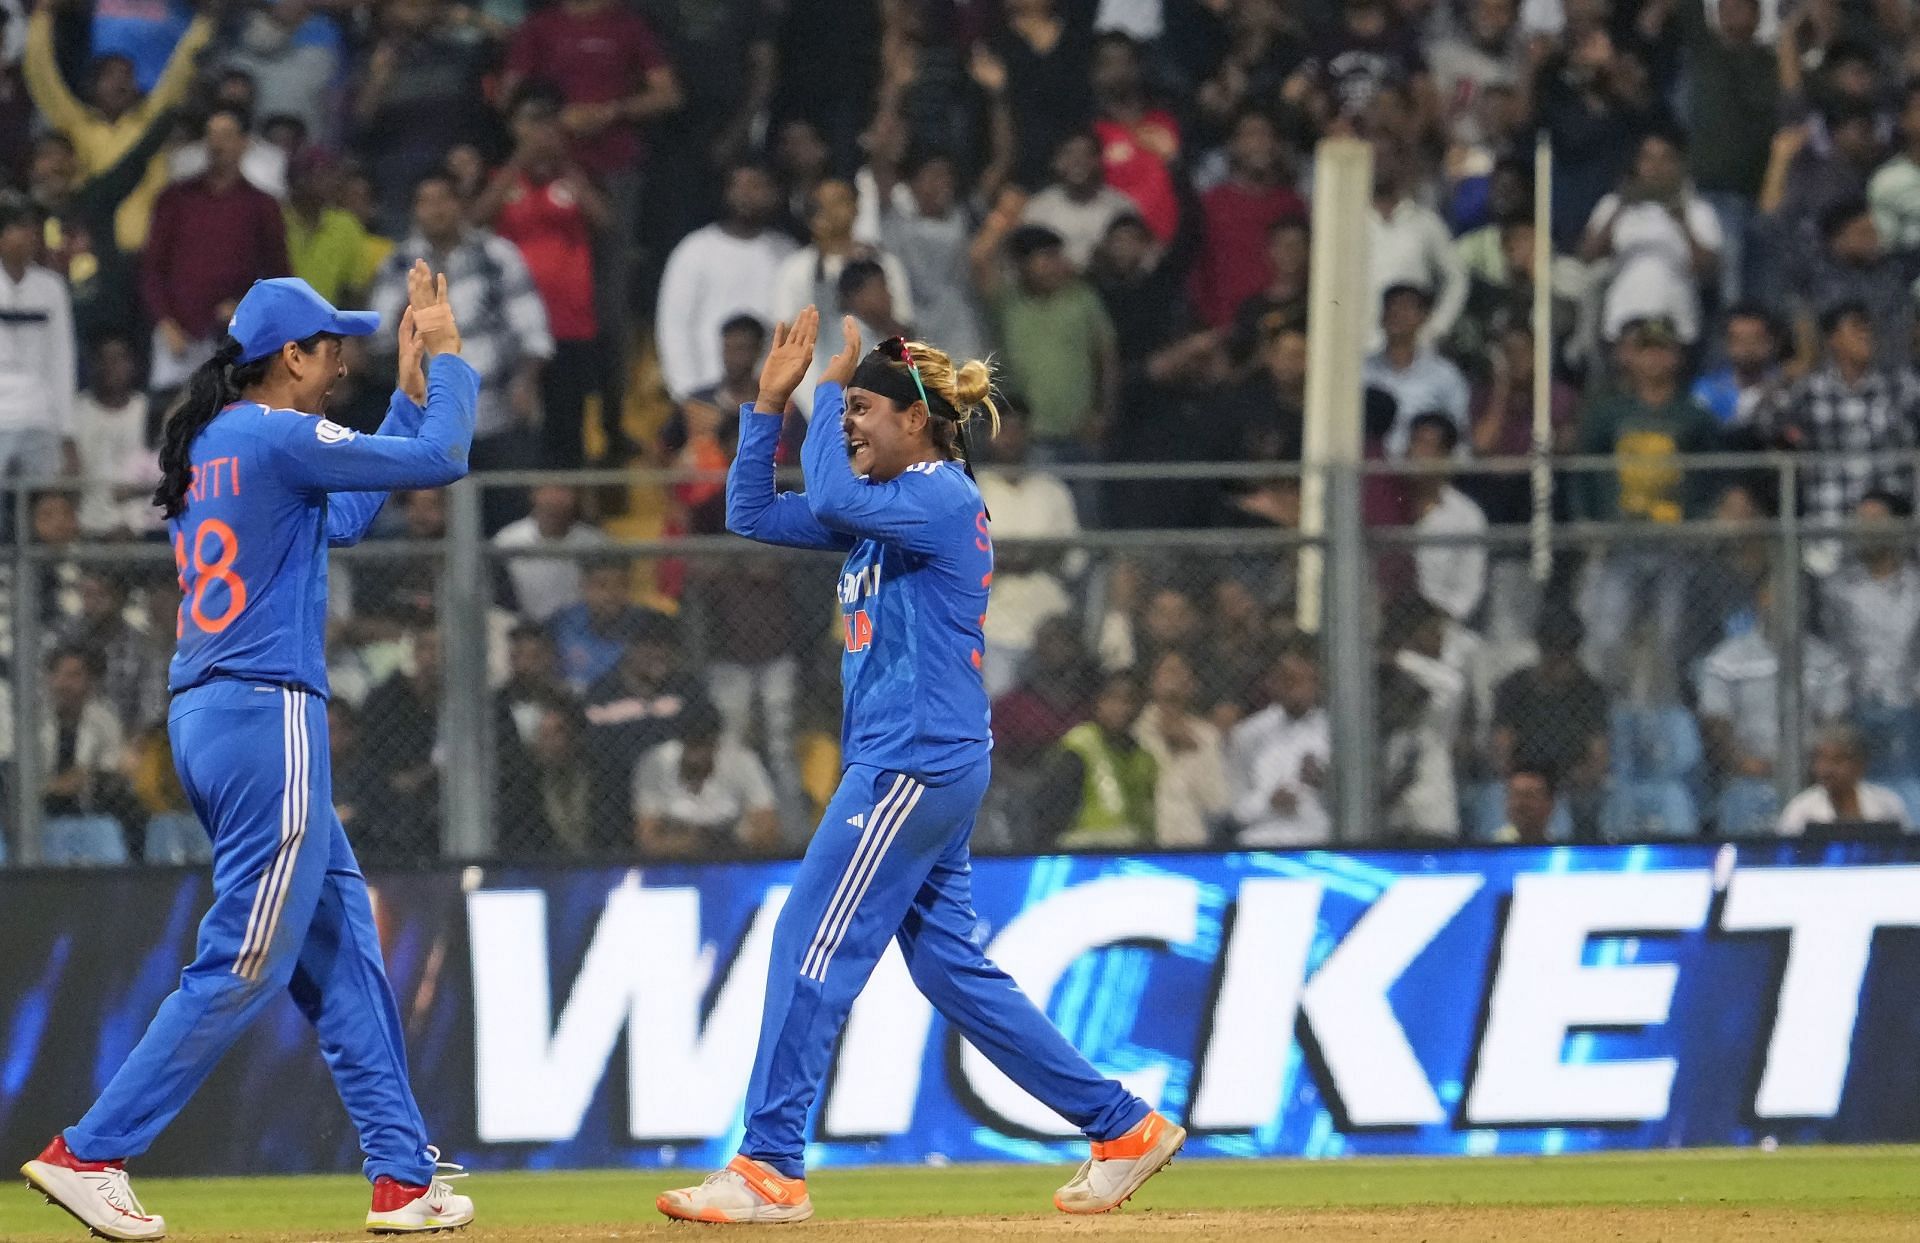 Saika Ishaque (right) made her India debut in the first T20I against England. [P/C: AP]